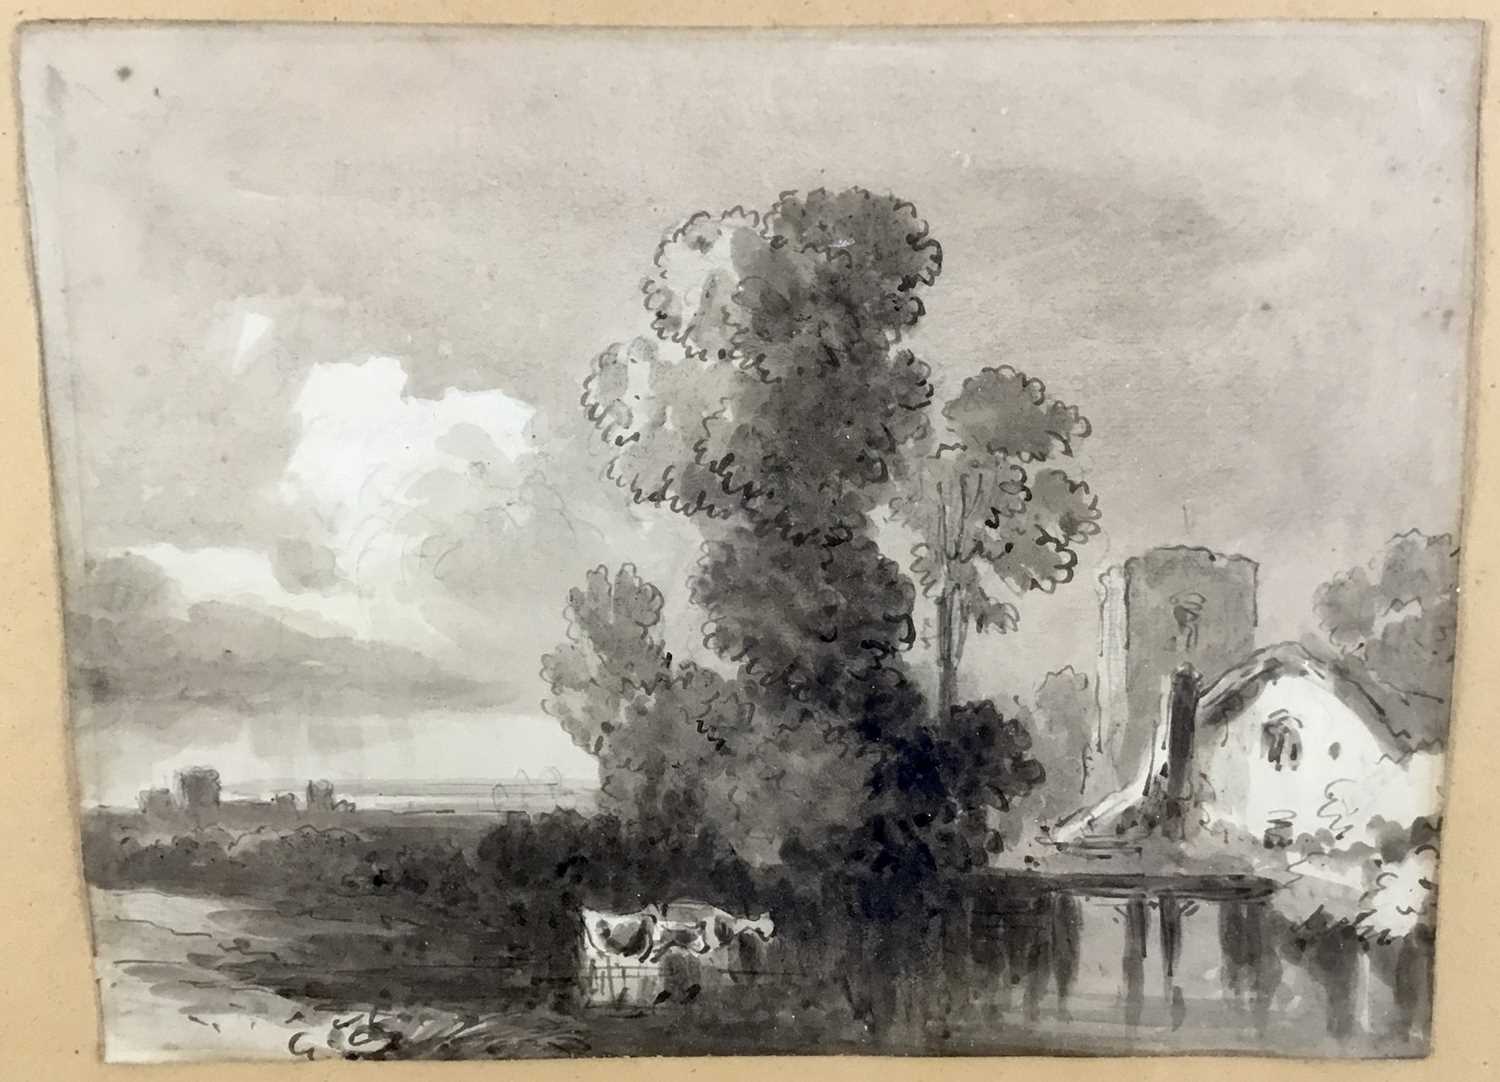 Lot 76 - Early 19th century monochrome study - cows and church, 23.5cm x 18cm